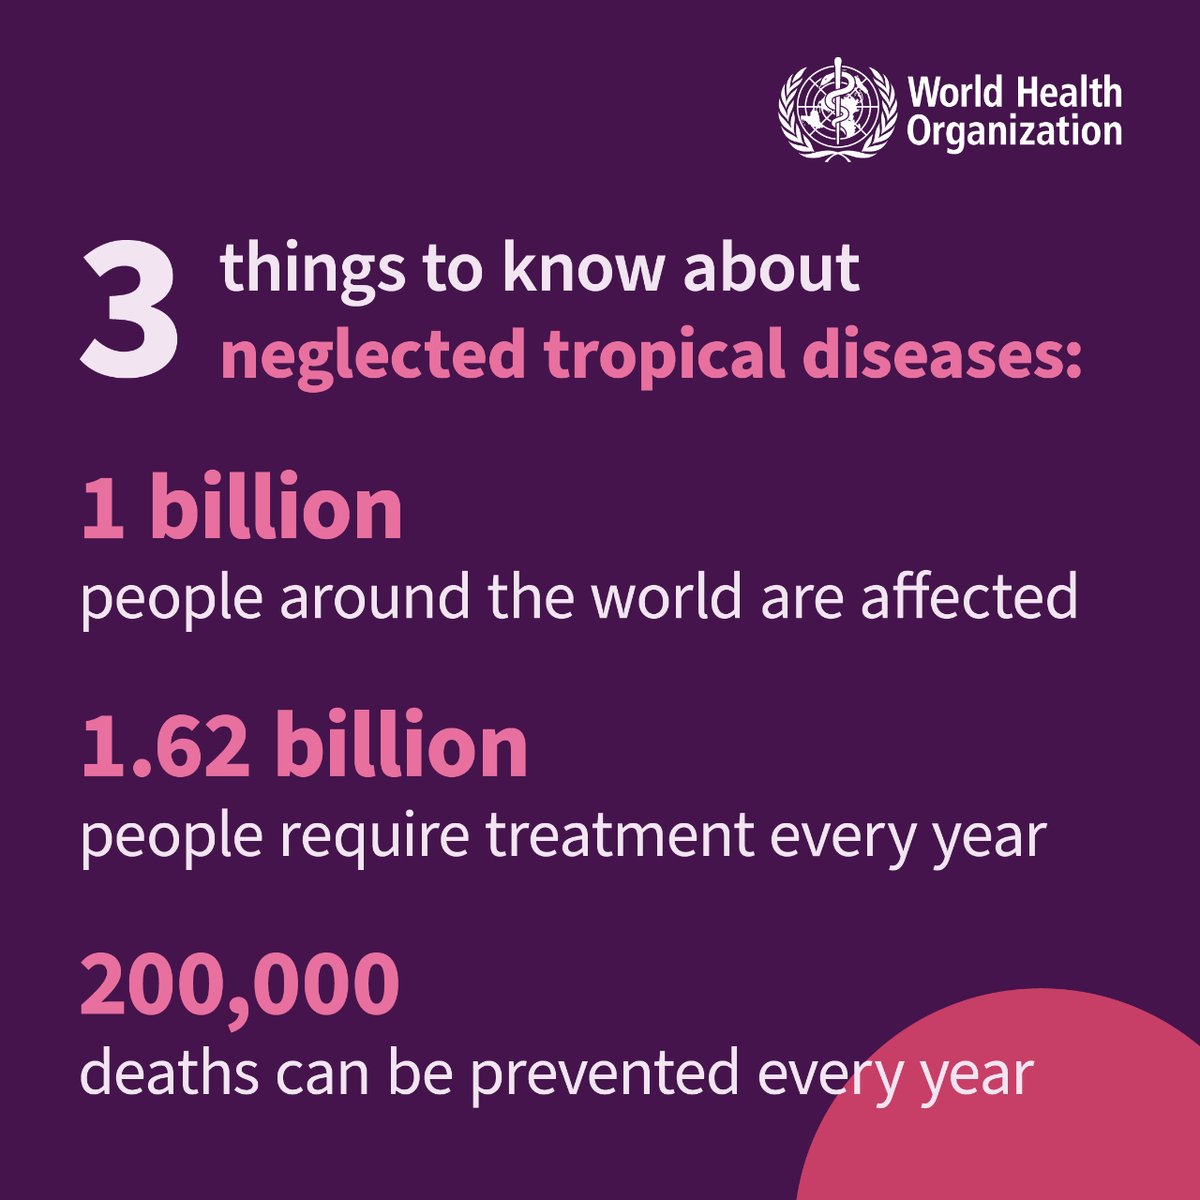 Today is #WorldNTDDay

Rabies is one of 21 officially recognised Neglected Tropical Diseases (NTDs) that affect 1 billion people worldwide.

Let's work together to end the deaths, stigma and neglect associated with NTDs.

#BeatsNTDs #UnitedAgainstRabies